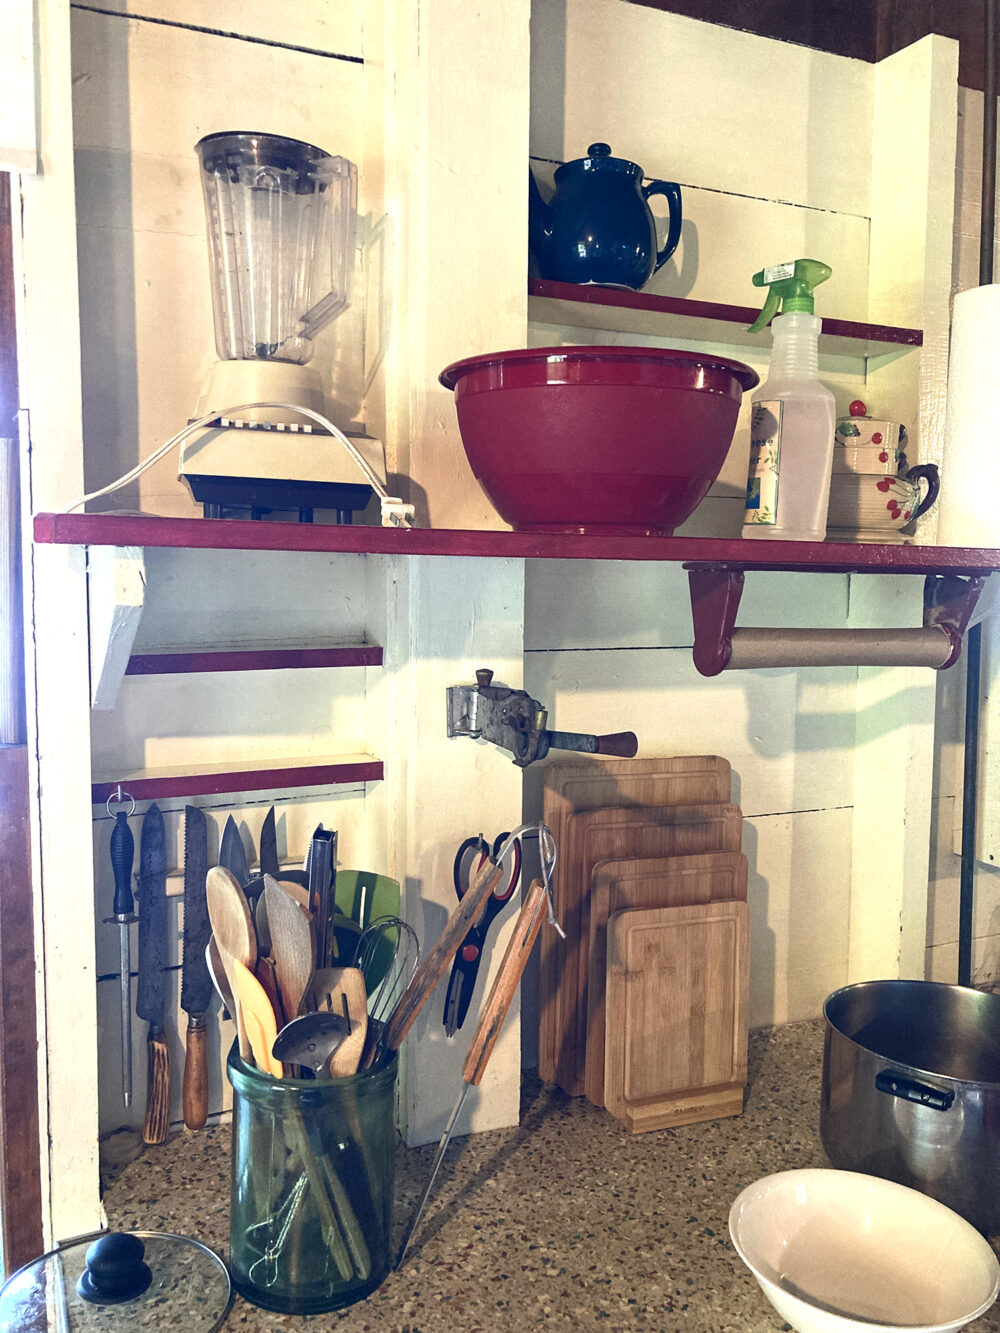 A countertop and white shelf is shown. Kitchen gear like a blender, utensils, knives and cutting boards are stored here.